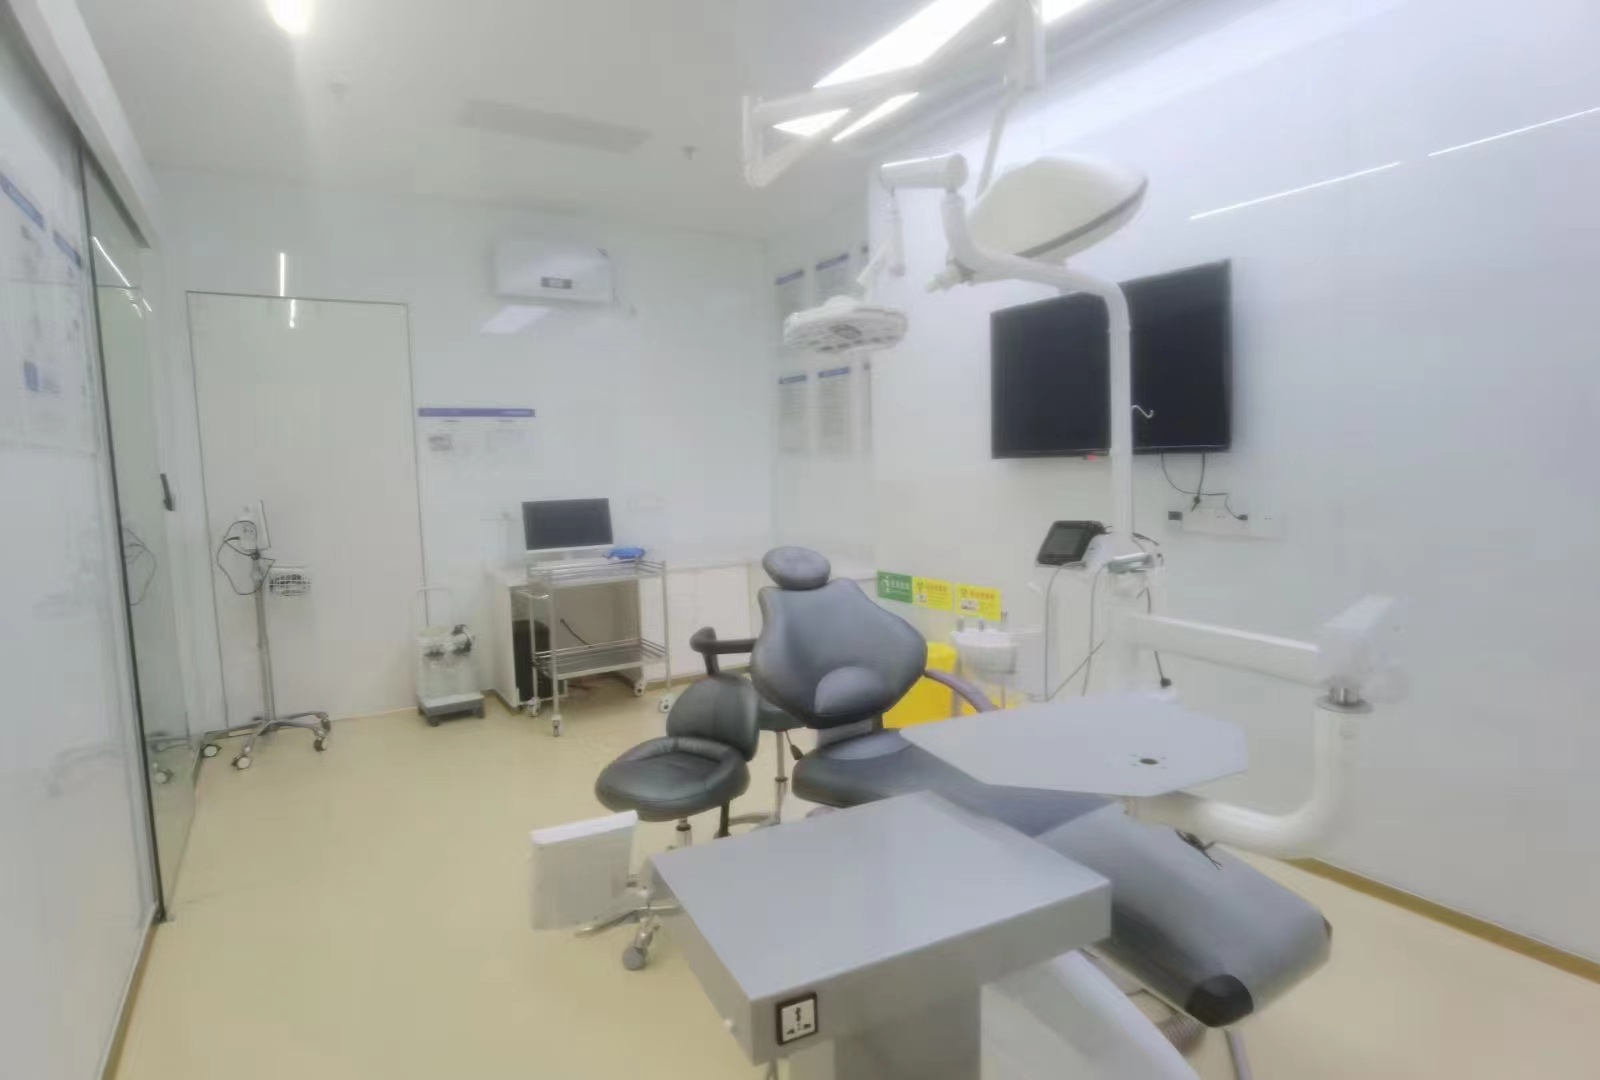 Dental Chair Disinfection and Maintenance Guide